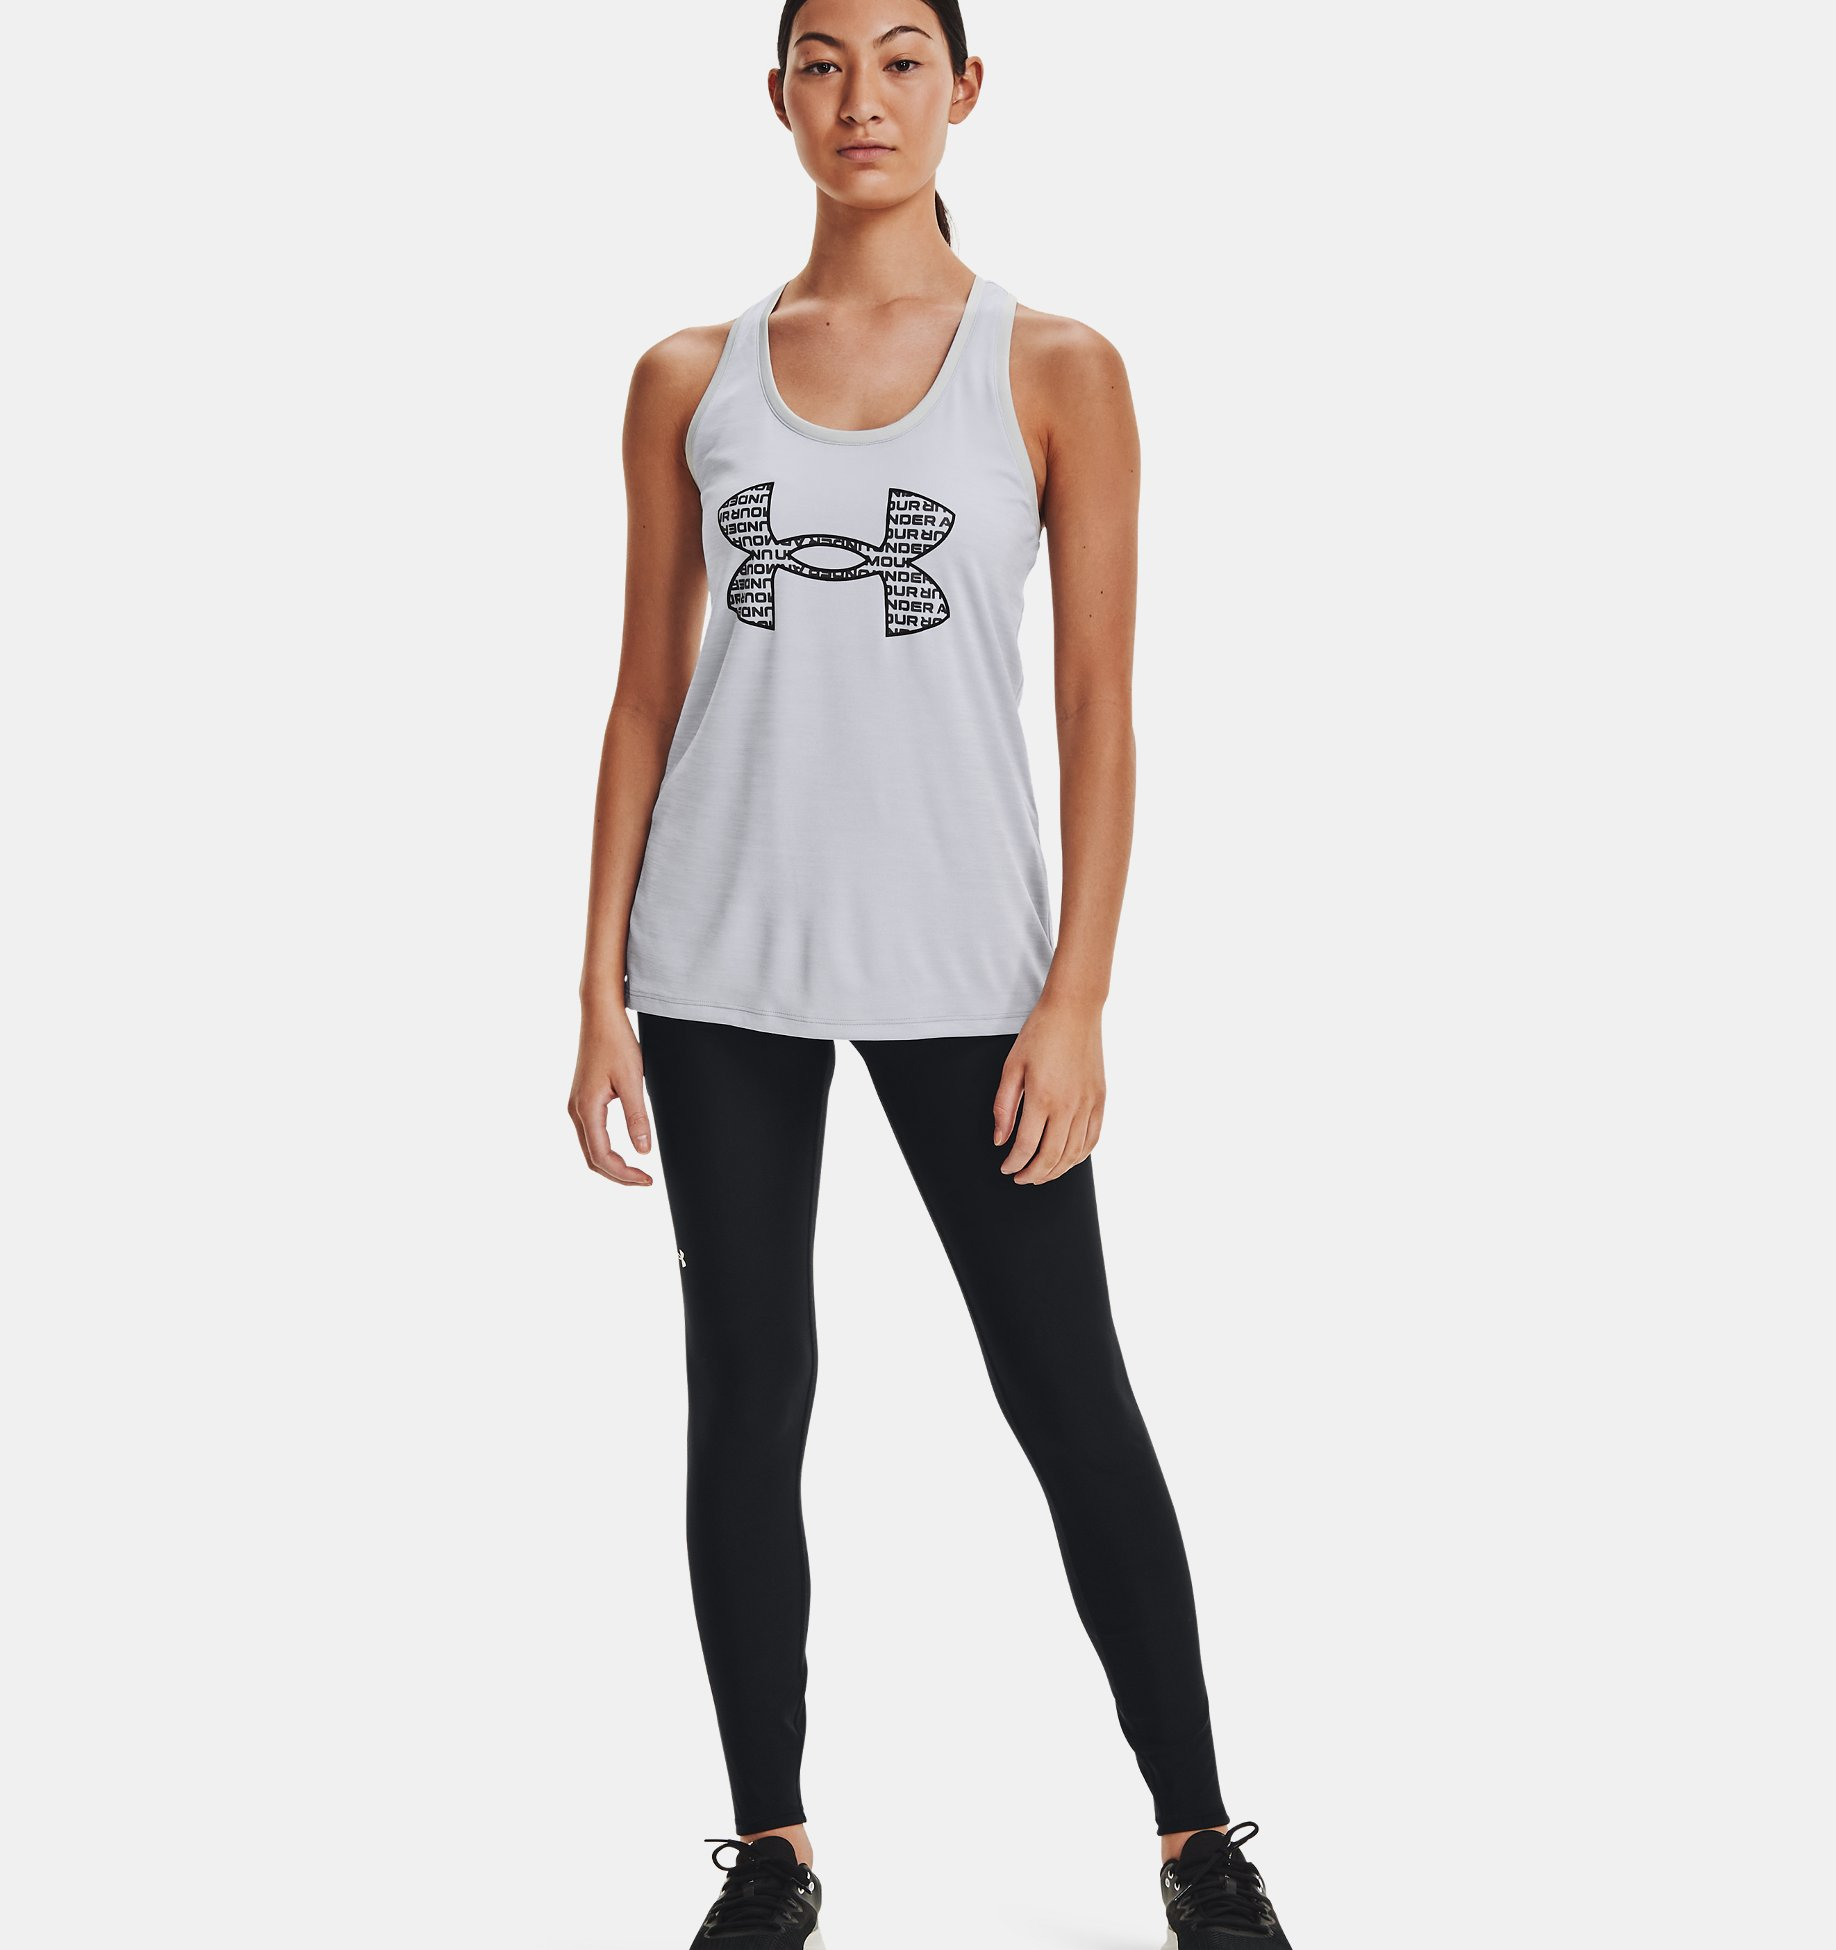 Up to 50% Off Women's Apparel & Accessories @Under Armour